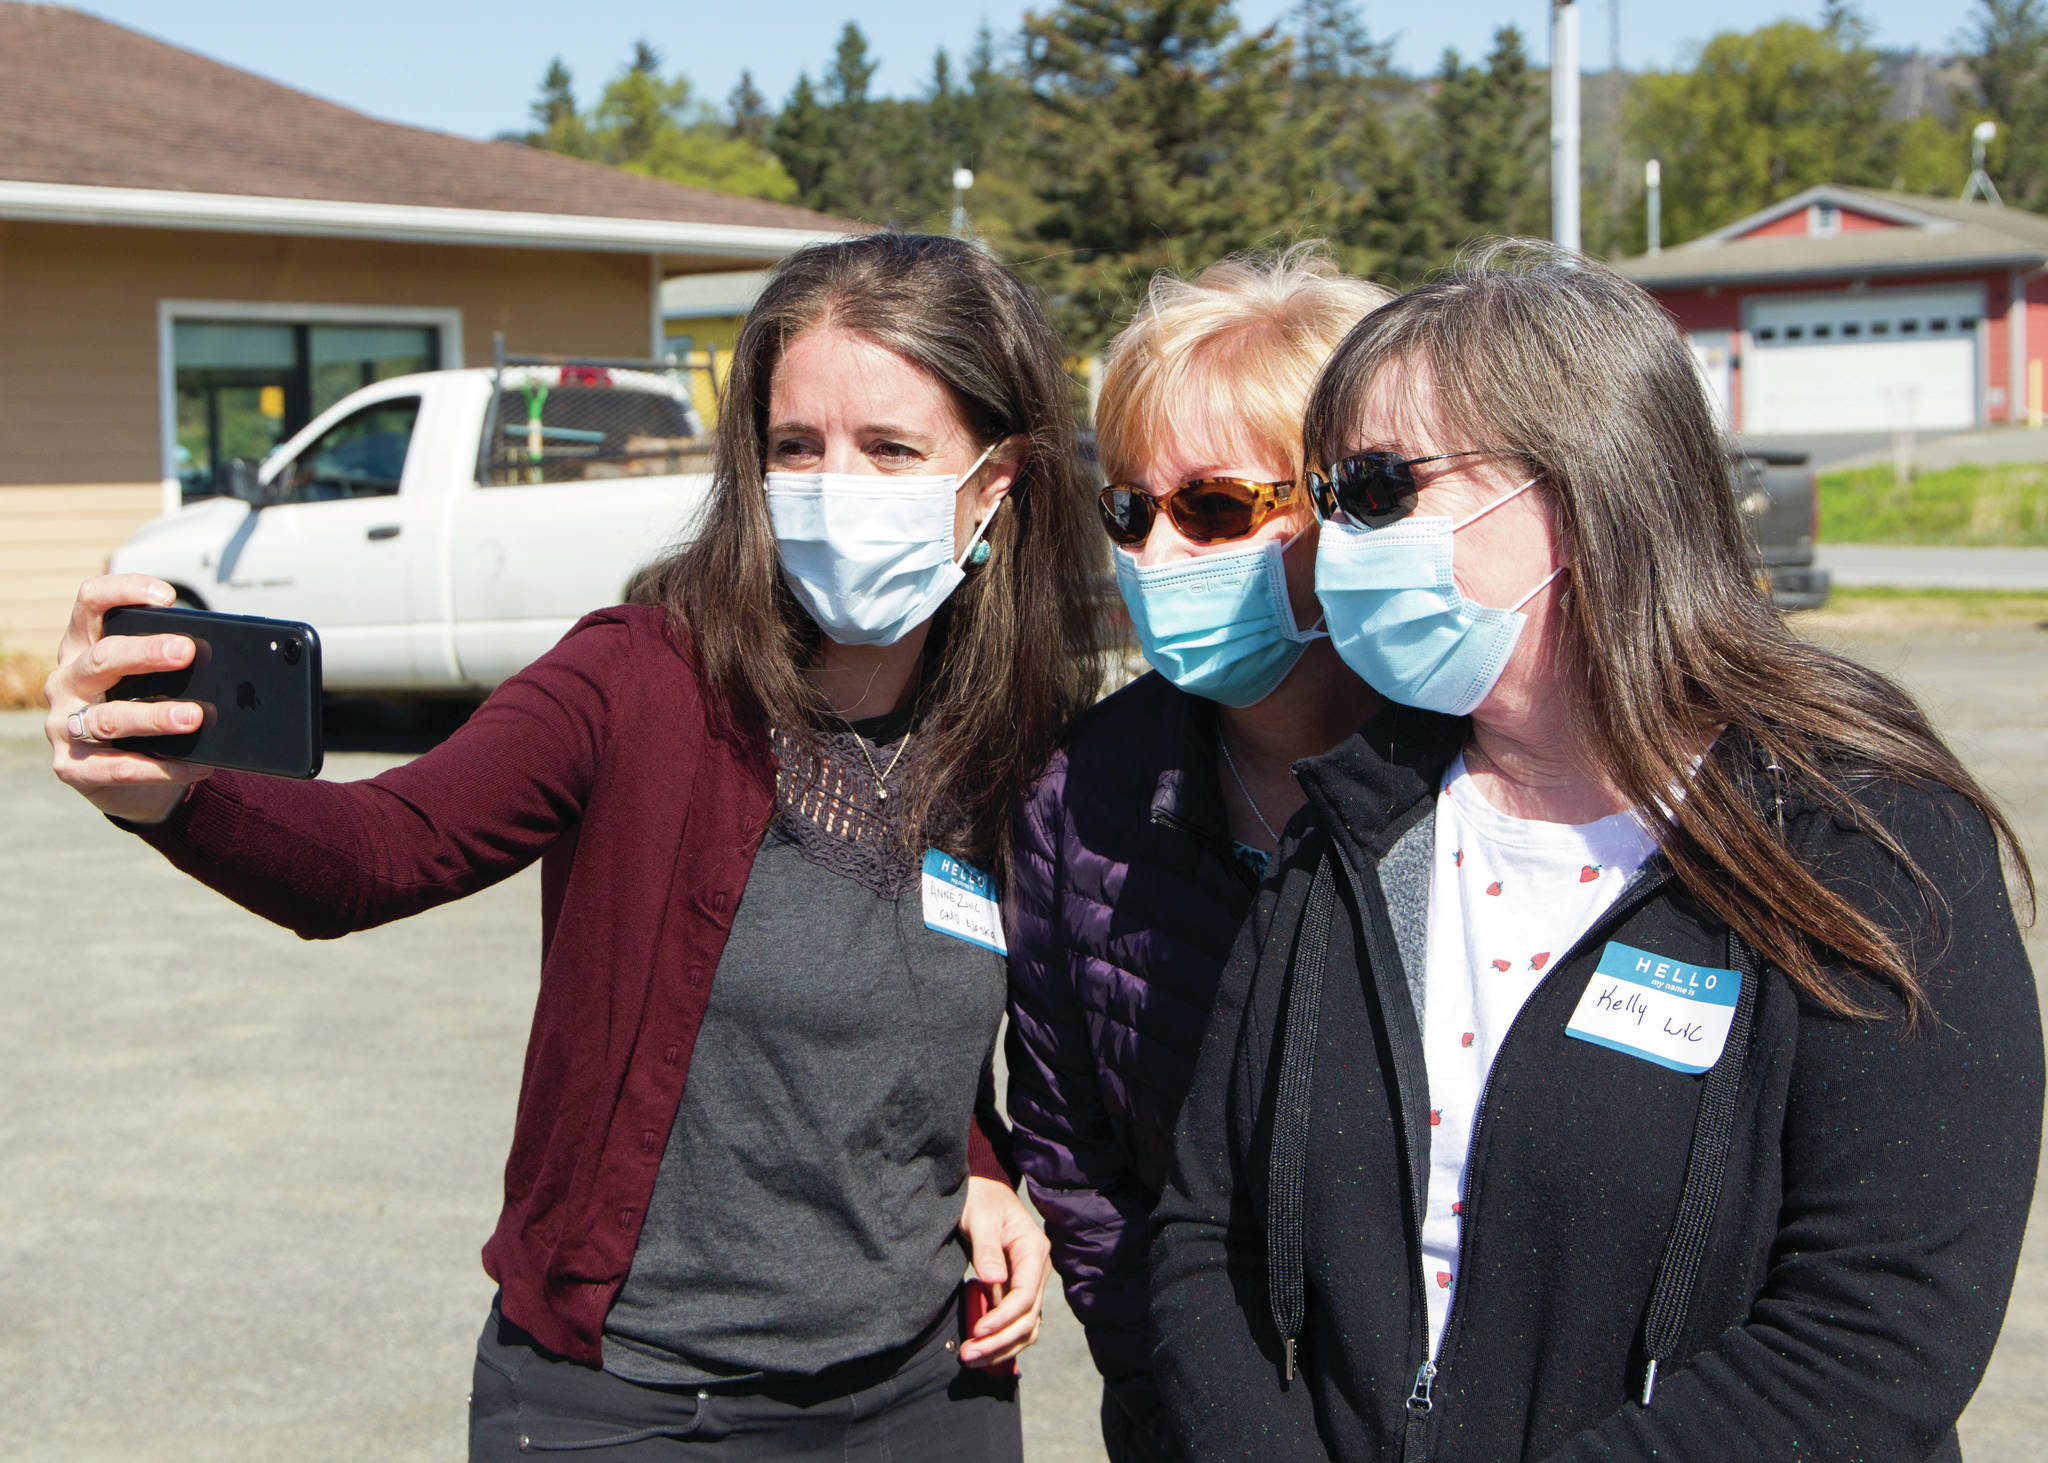 Sarah Knapp / Homer News
Alaska Chief Medical Officer Anne Zink, M.D., left, poses for a selfie with Kelly Bolt, right, and Debbie Gardner, who work at WIC, at a meet-and-greet on Thursday, May 27, at the Homer Public Health Center in Homer.